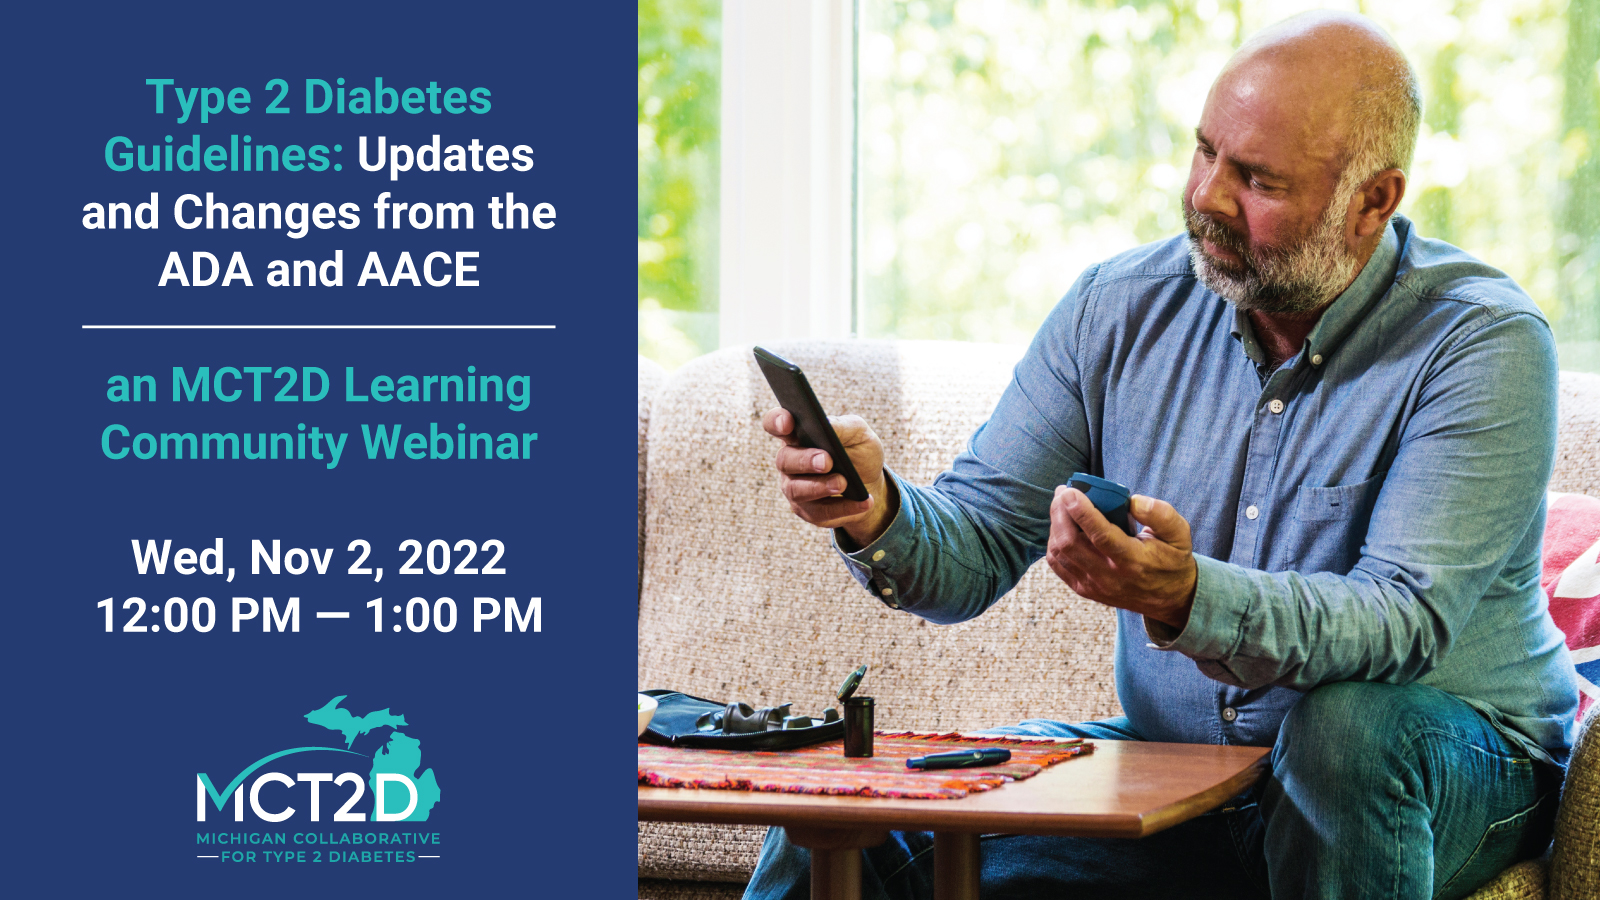 Tye 2 Diabetes guidelines updates and changes from ada and aace an mct2d learnign community webinar wed, nov 2, 2022 12-1Pm 